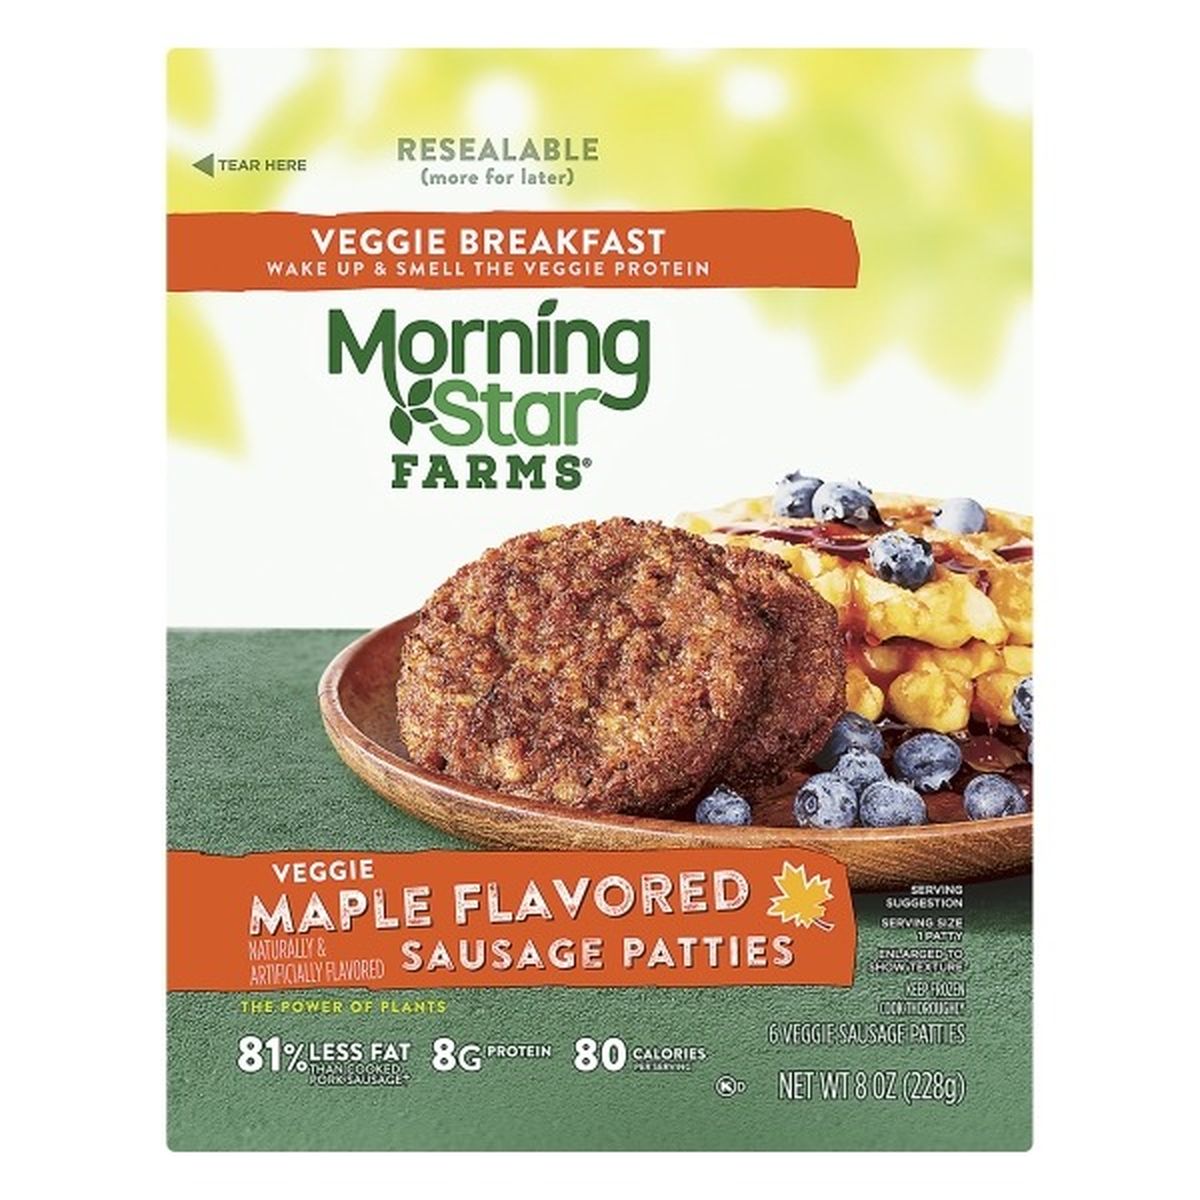 Calories in Morning Star Farms Sausage Patties, Veggie Maple Flavored